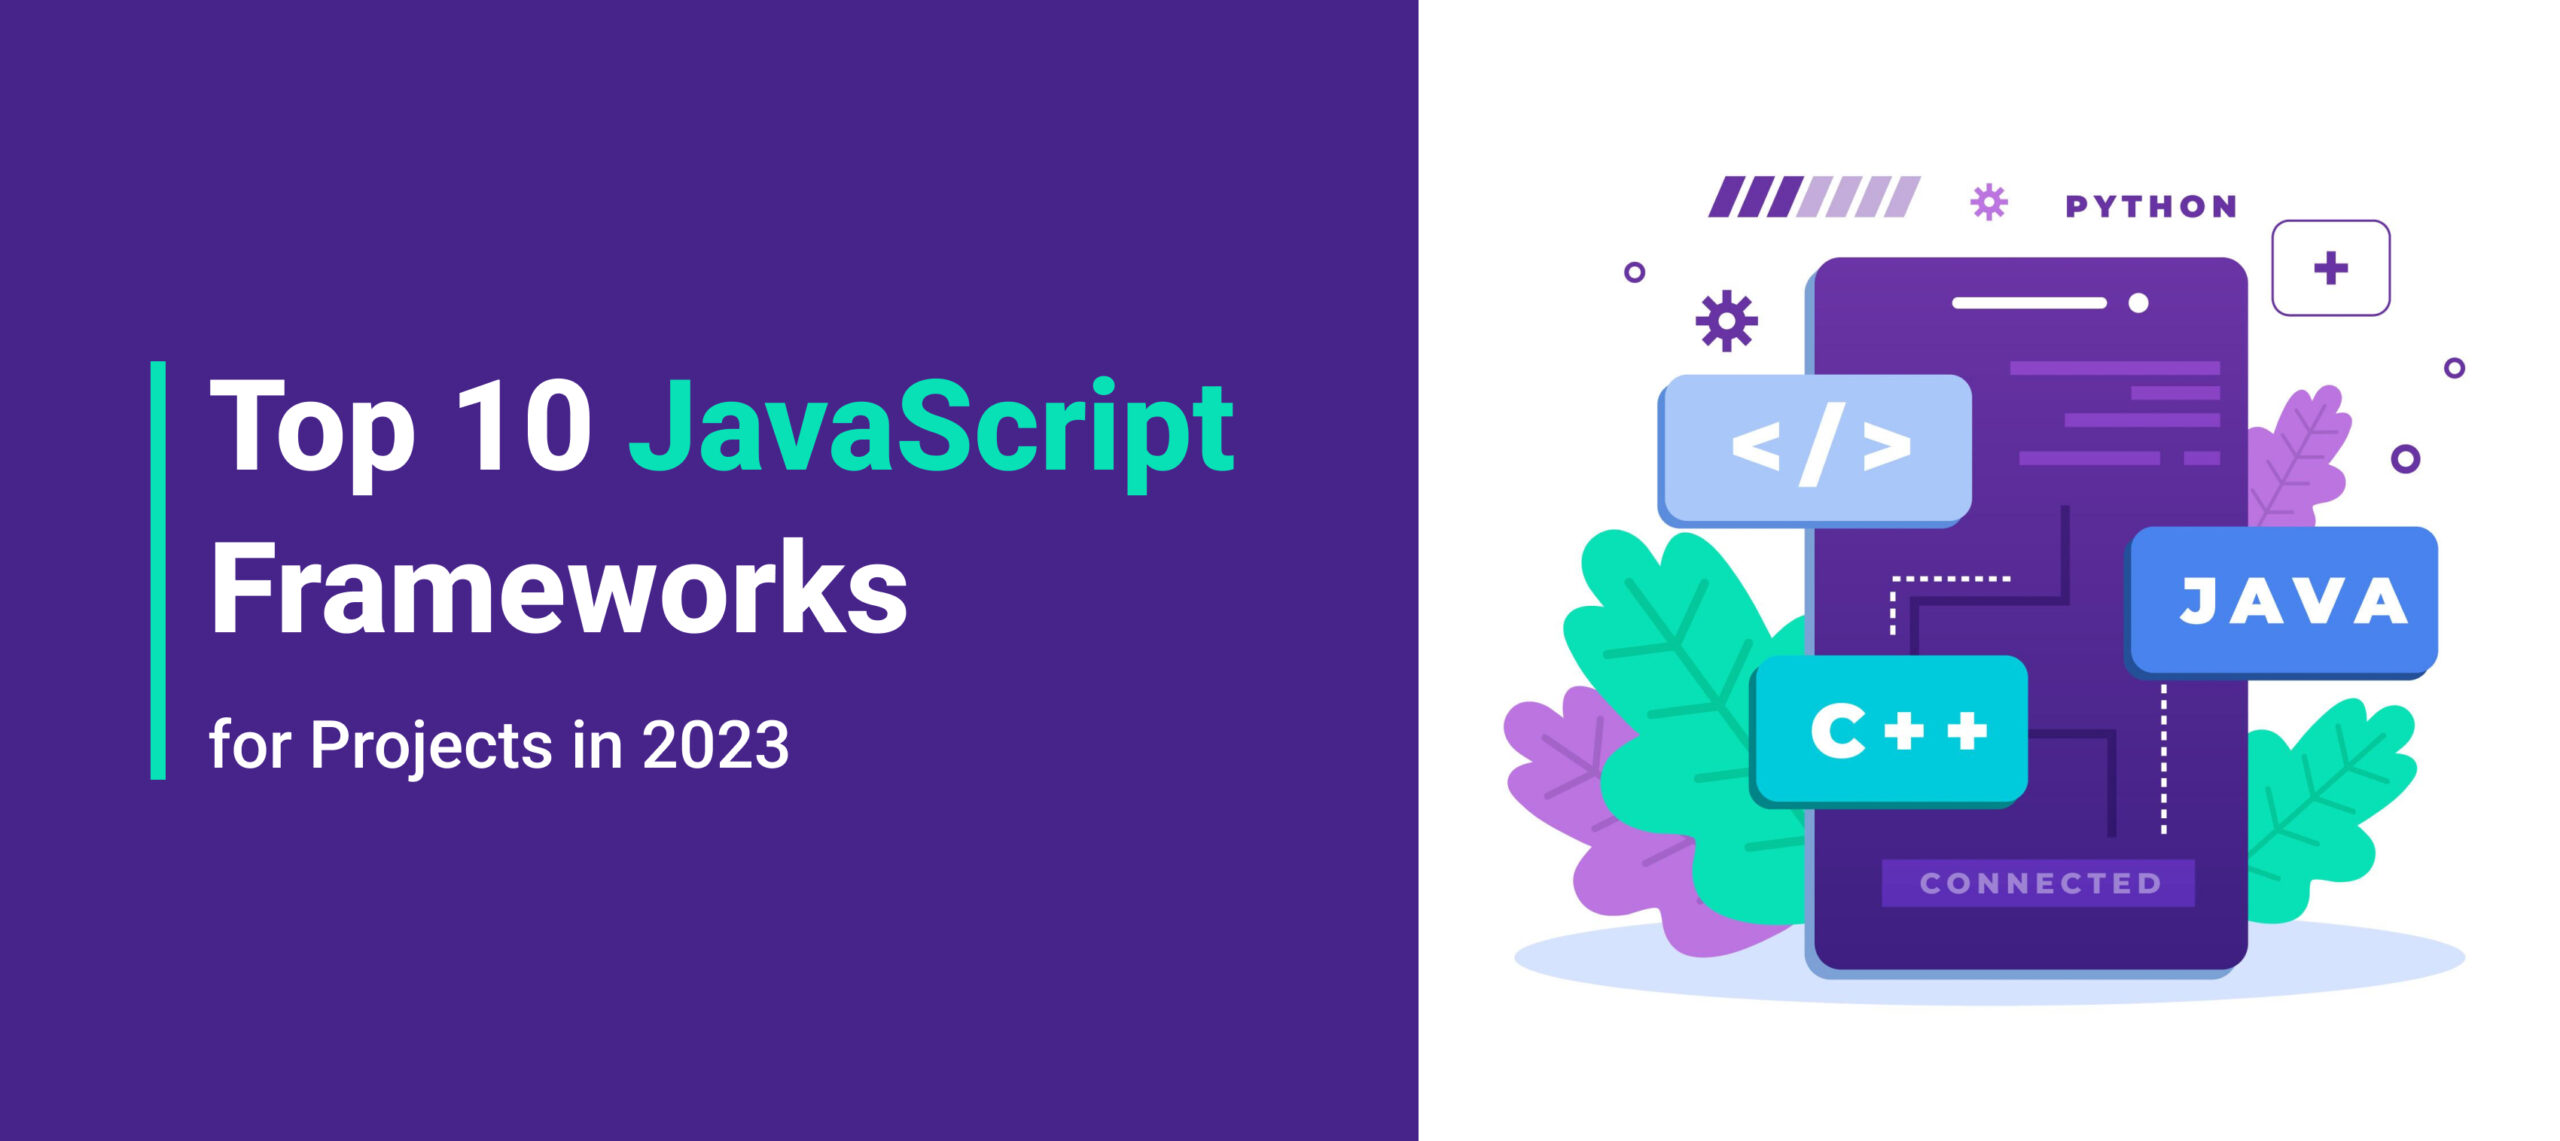  Top 10 JavaScript Frameworks for Projects in 2023